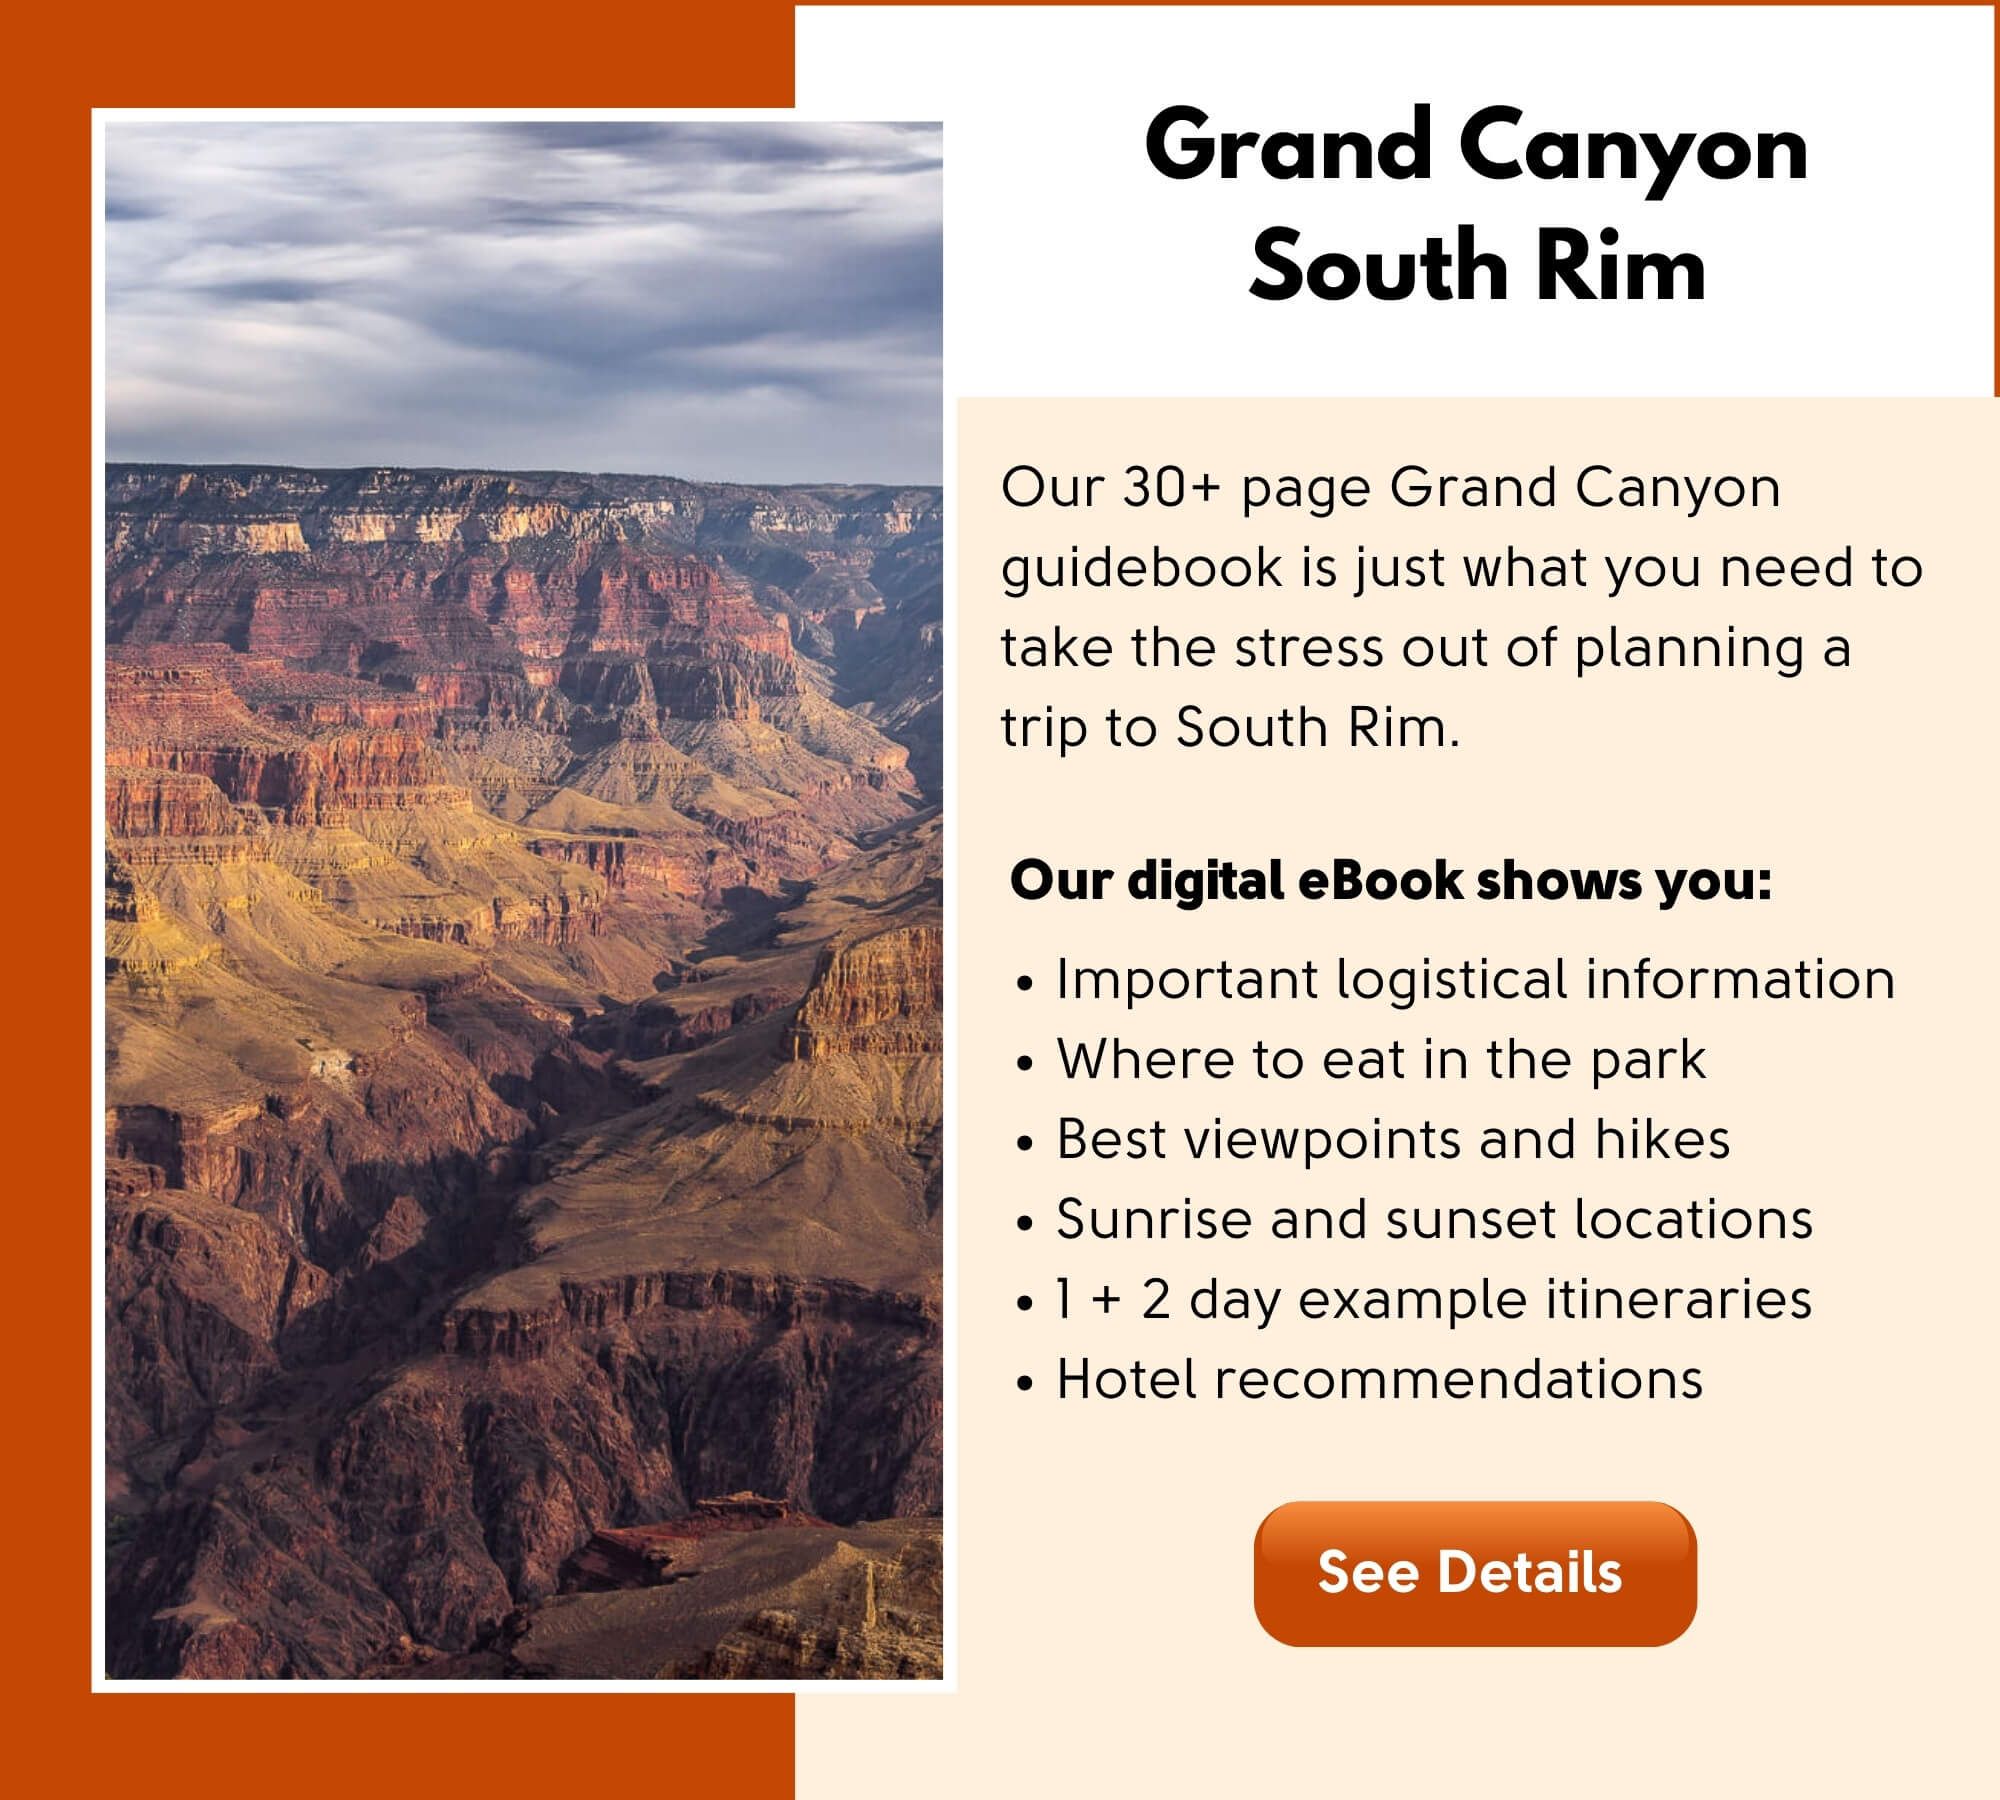 Grand Canyon South Rim Guidebook by Where Are Those Morgans